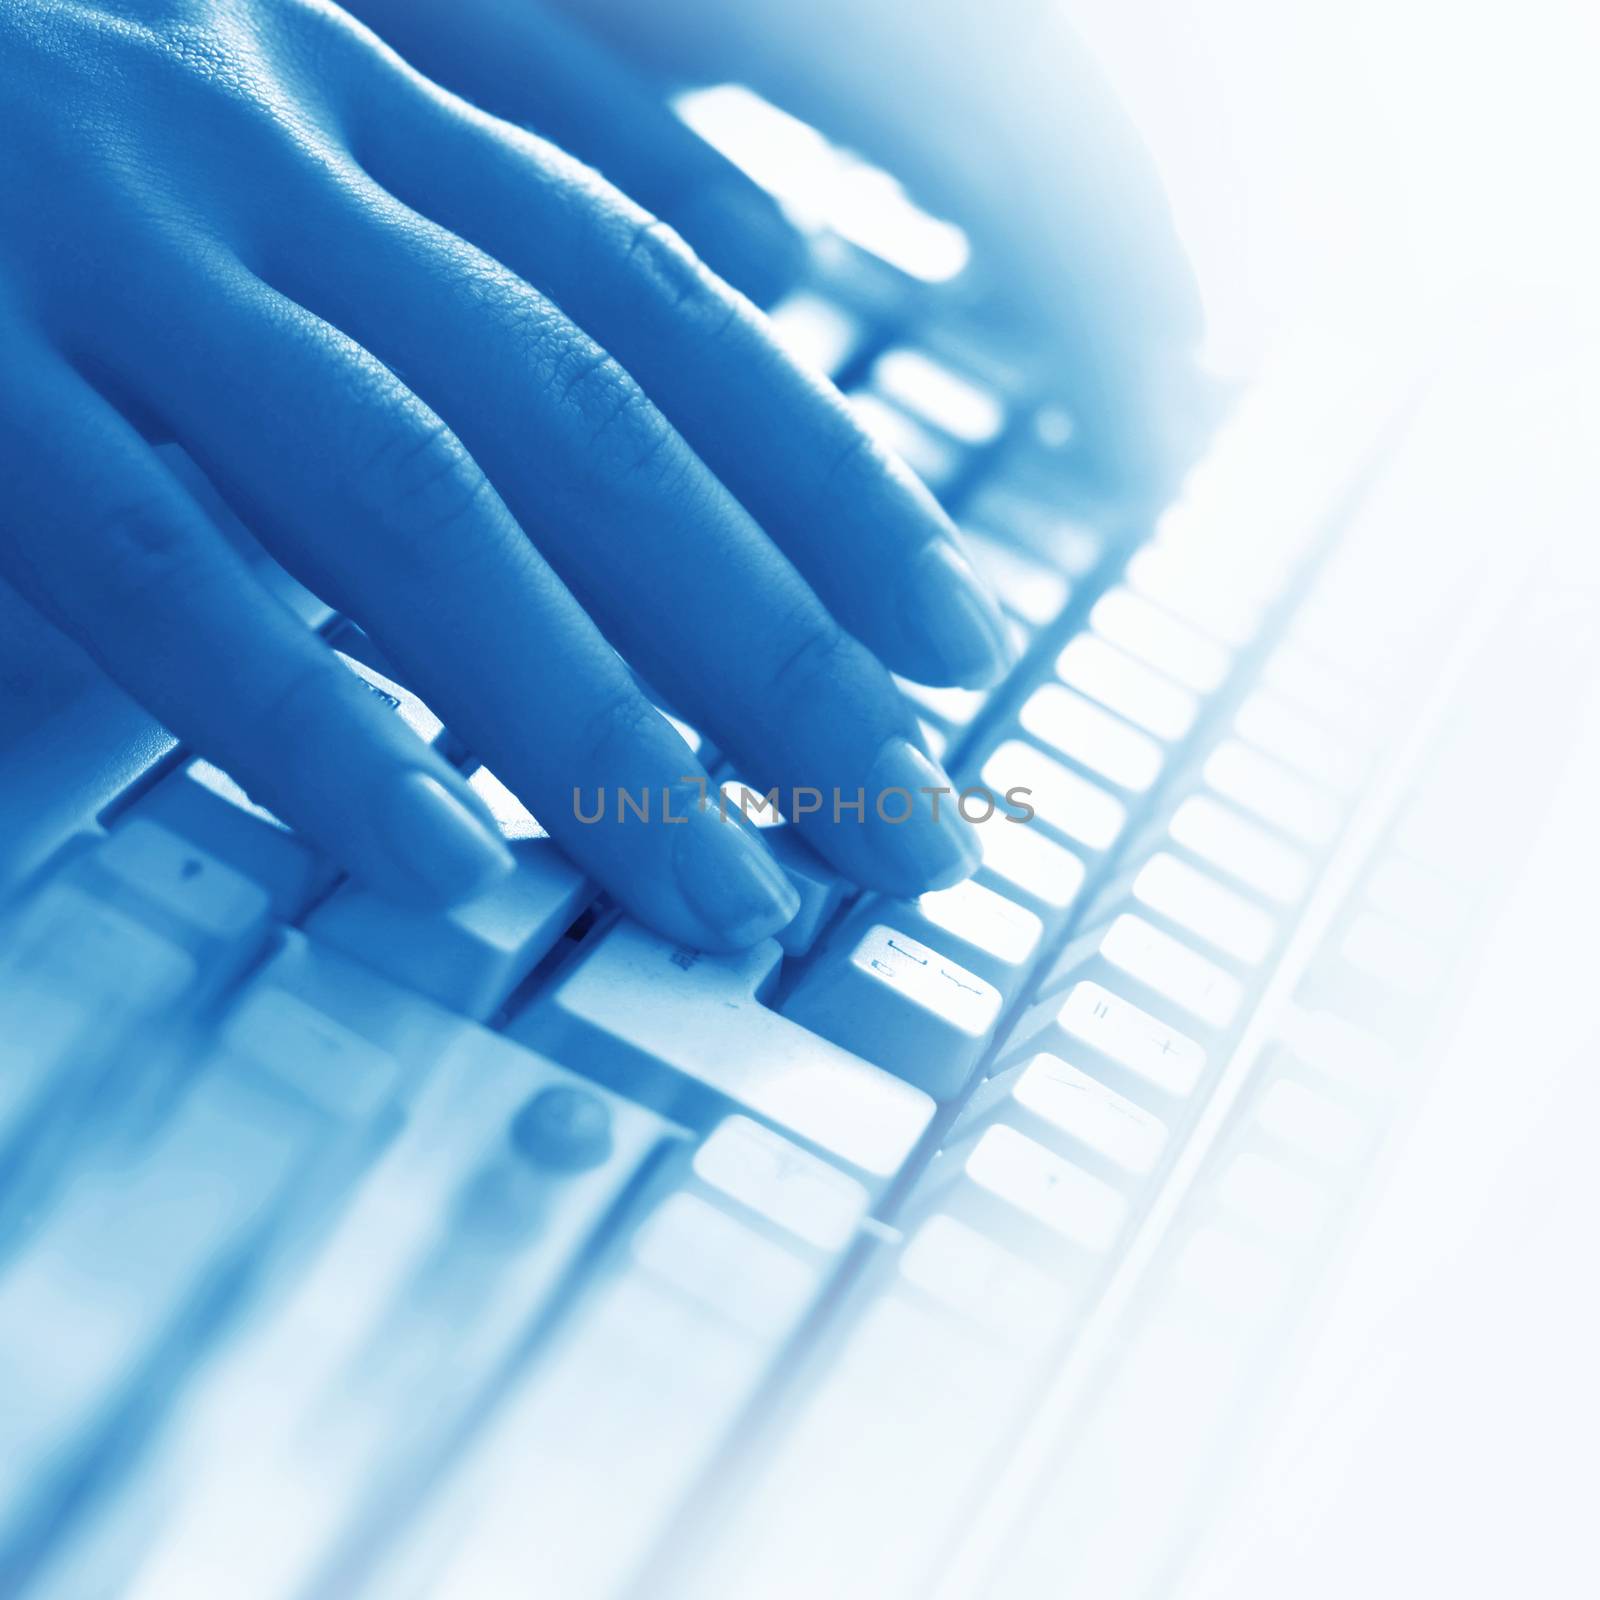 Fingers texting on computer keyboard by Yellowj